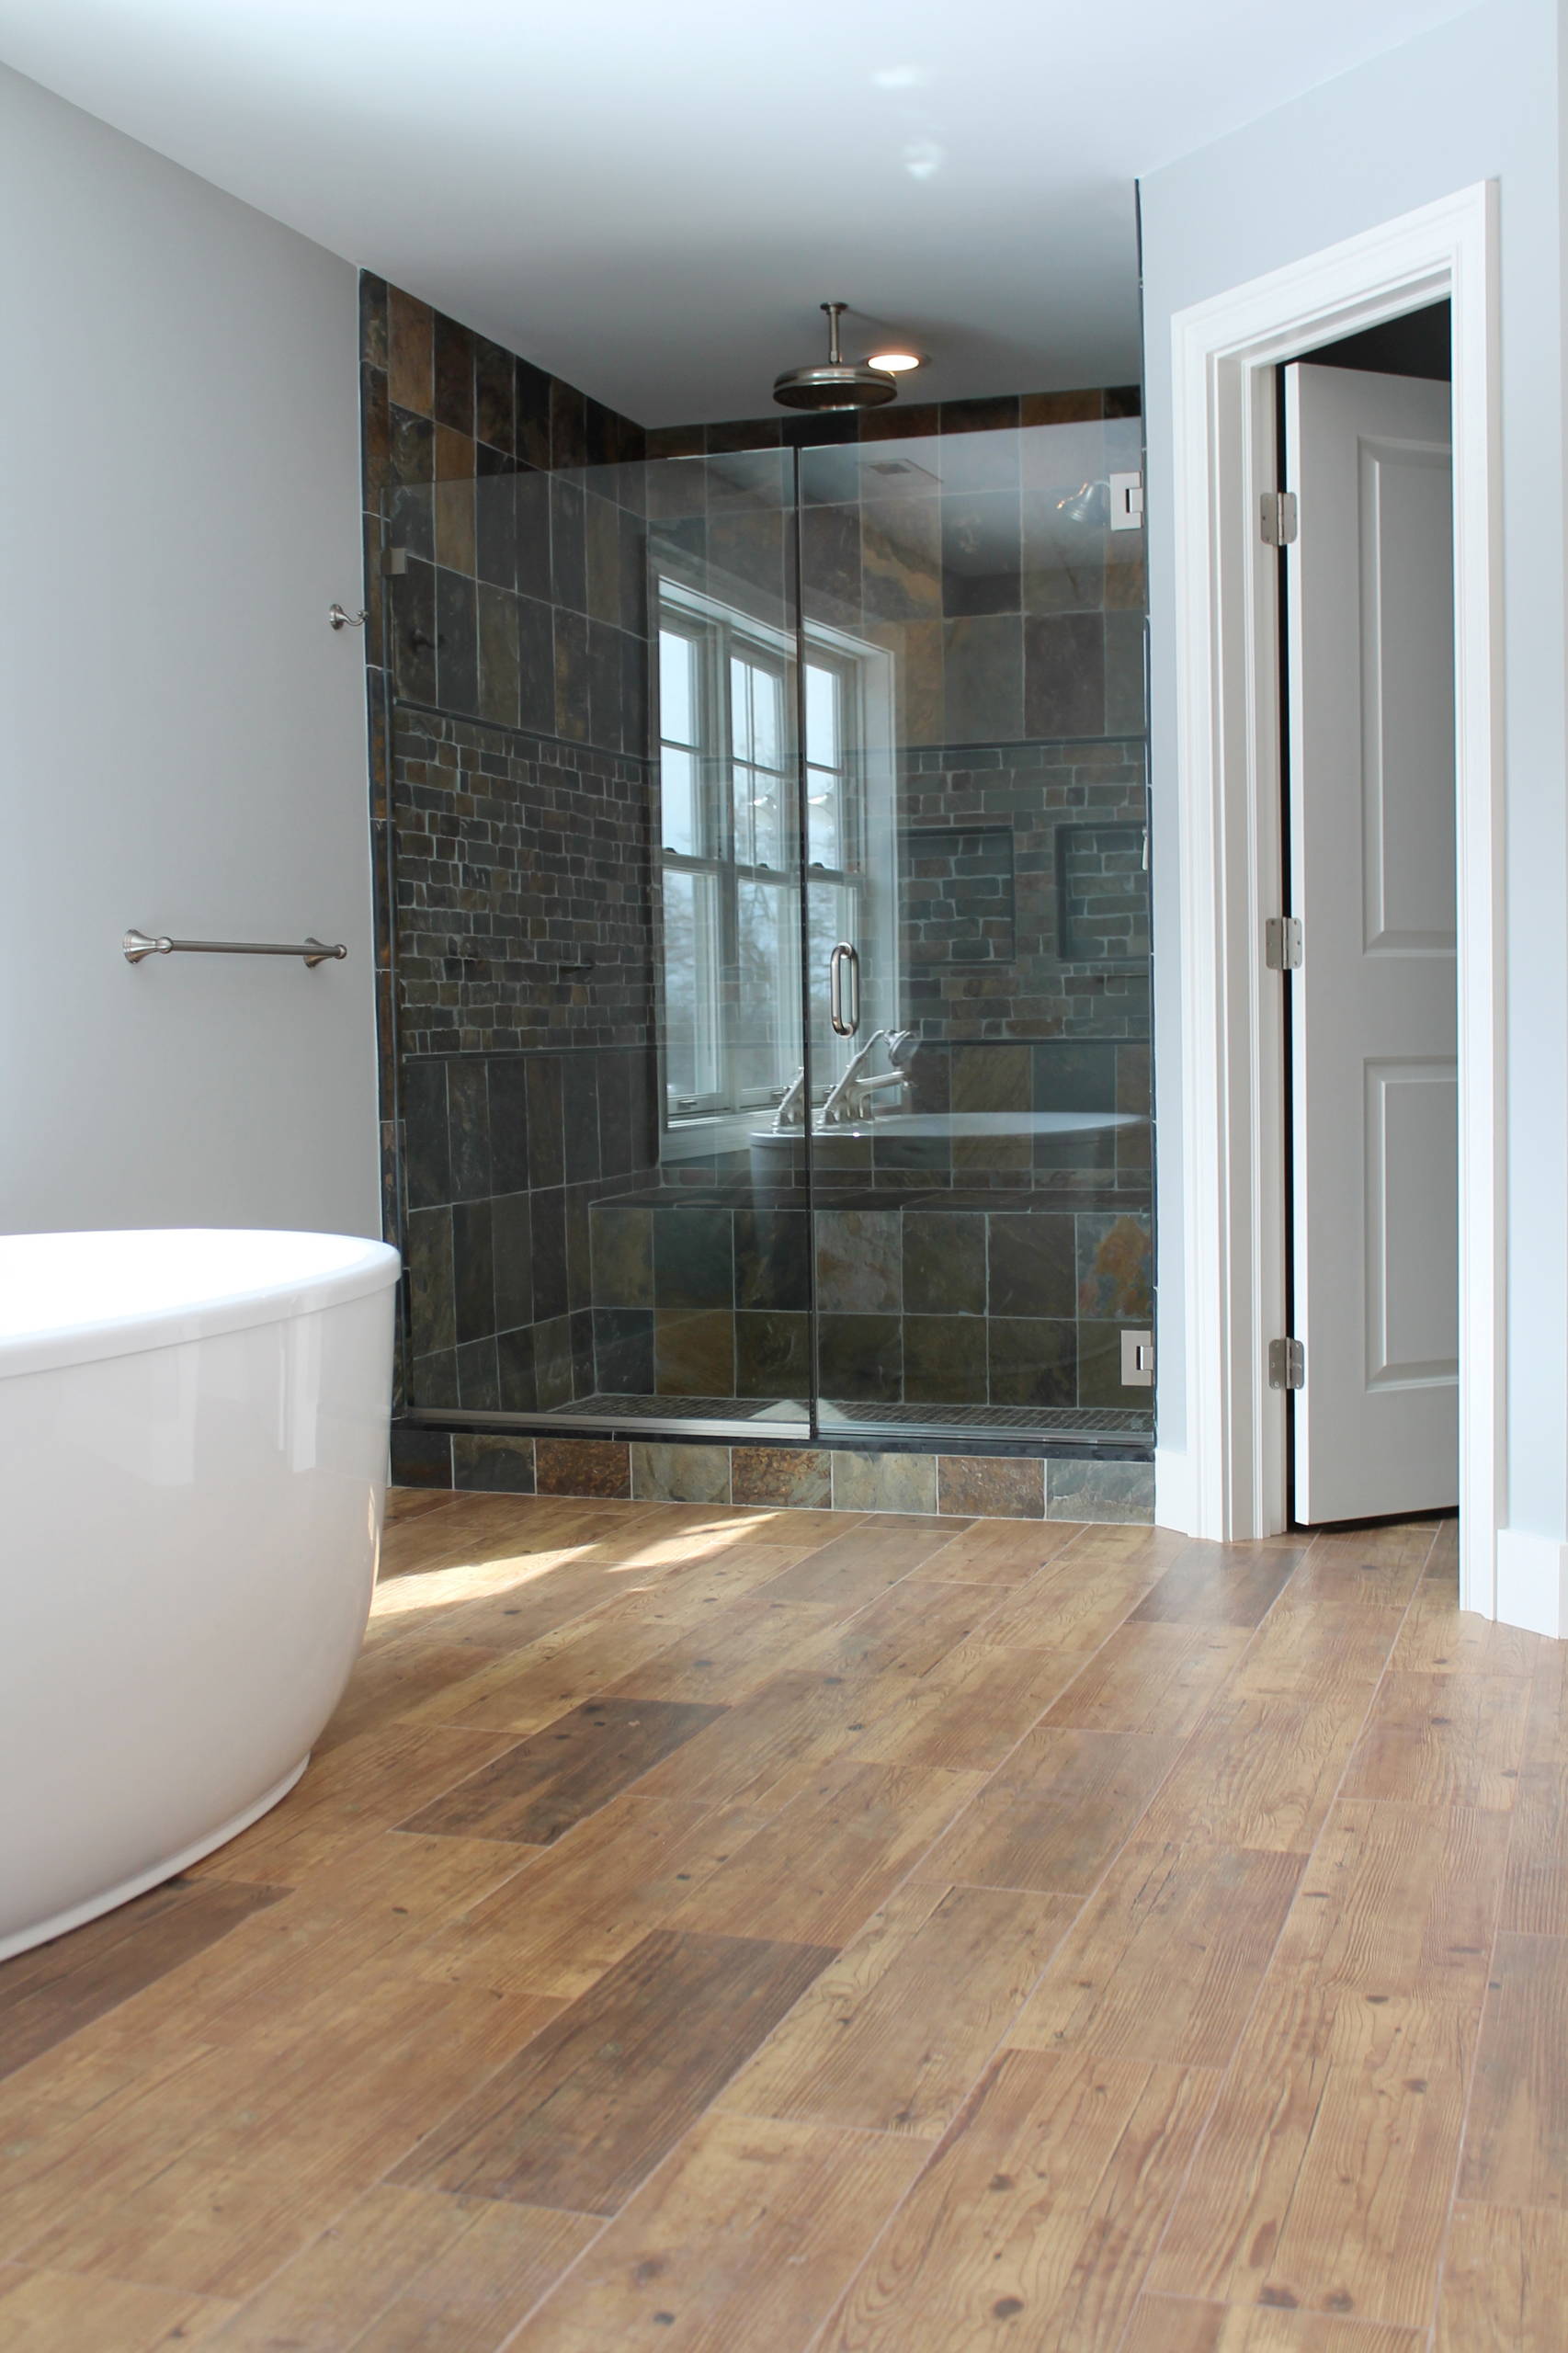 75 Beautiful Wood Look Tile Bathroom Pictures Ideas April 2021 Houzz